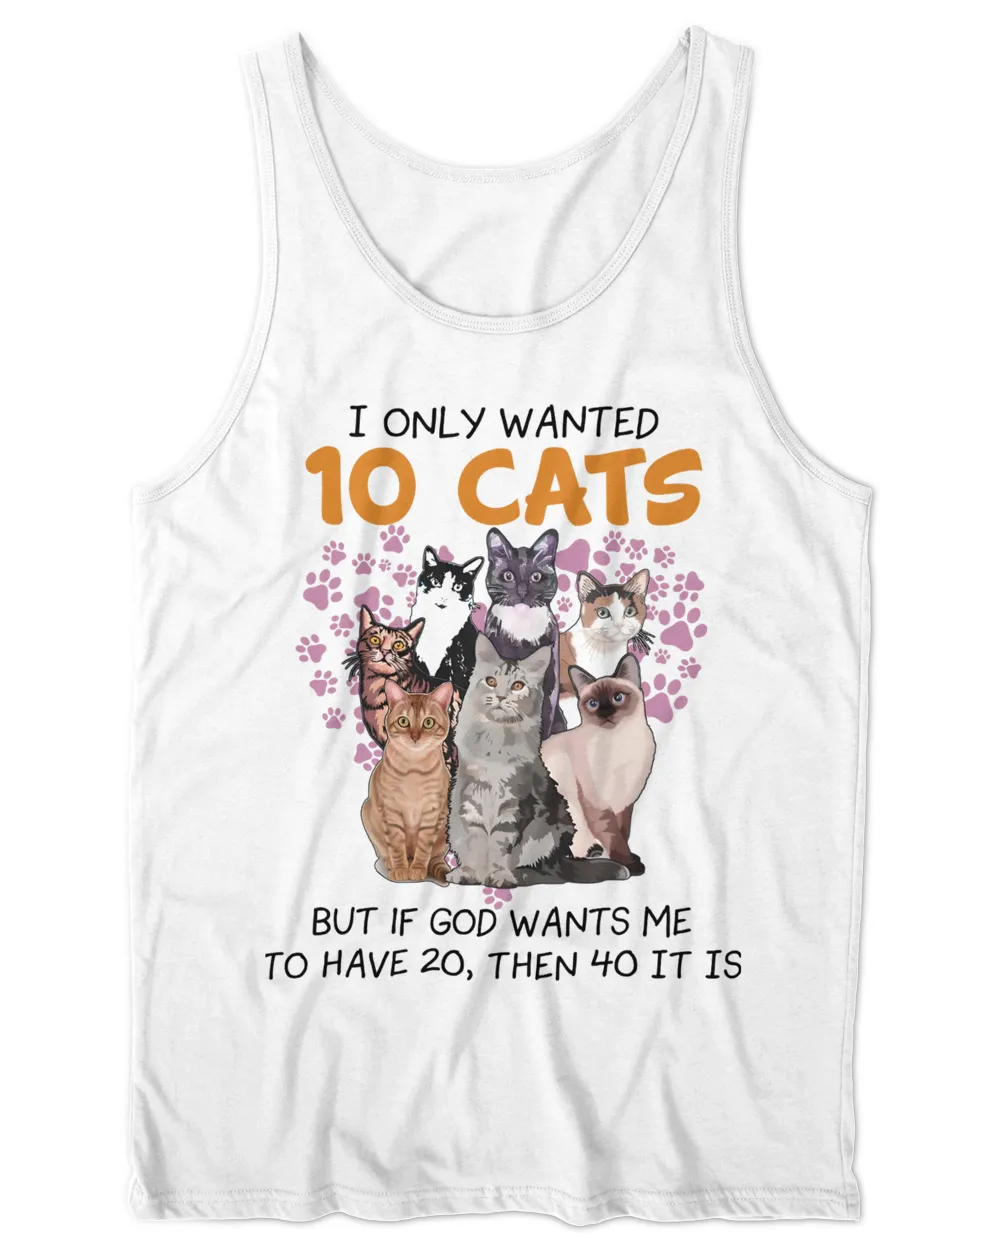 Cat - I only wanted 10 cats but if god wants me to have 20, then 40 it is